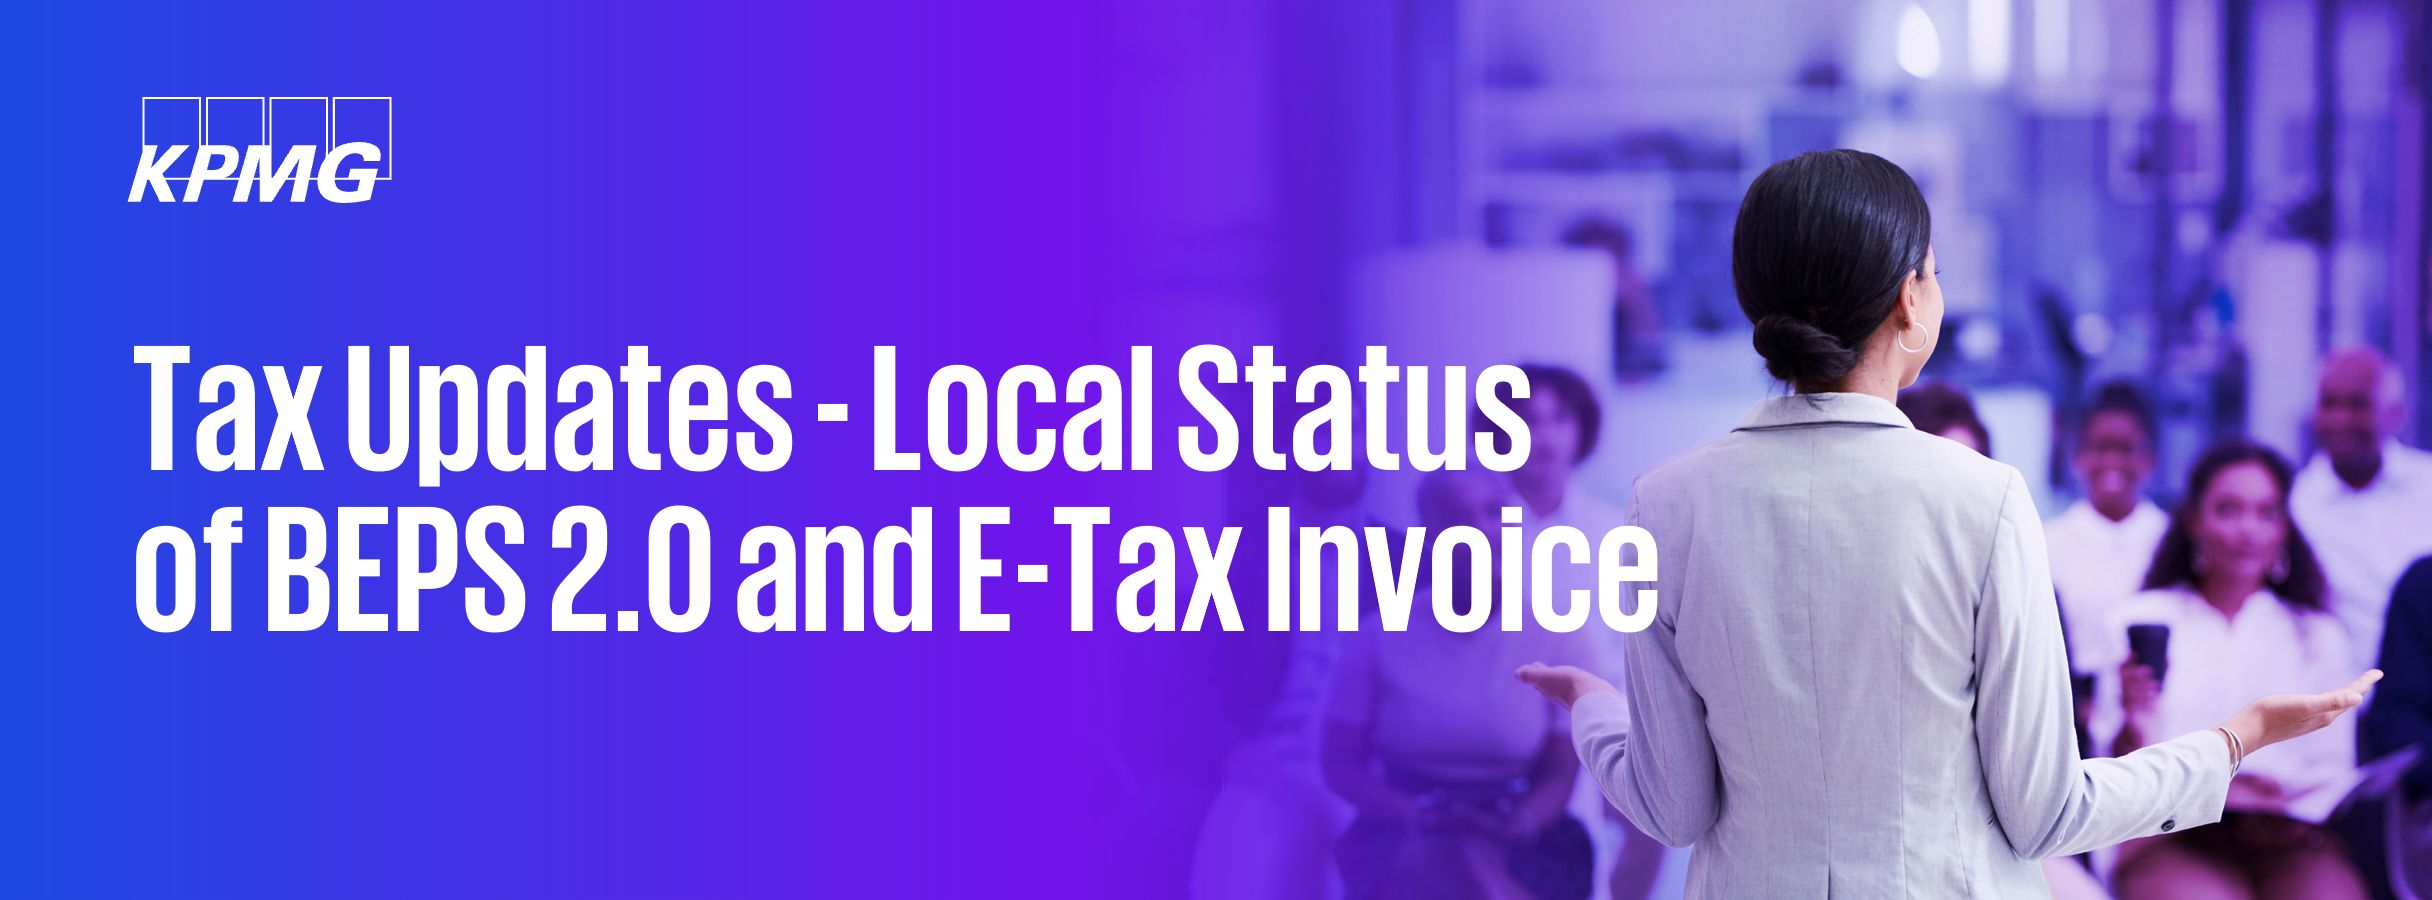 Tax Updates - Local Status of BEPS 2.0 and E-Tax Invoice